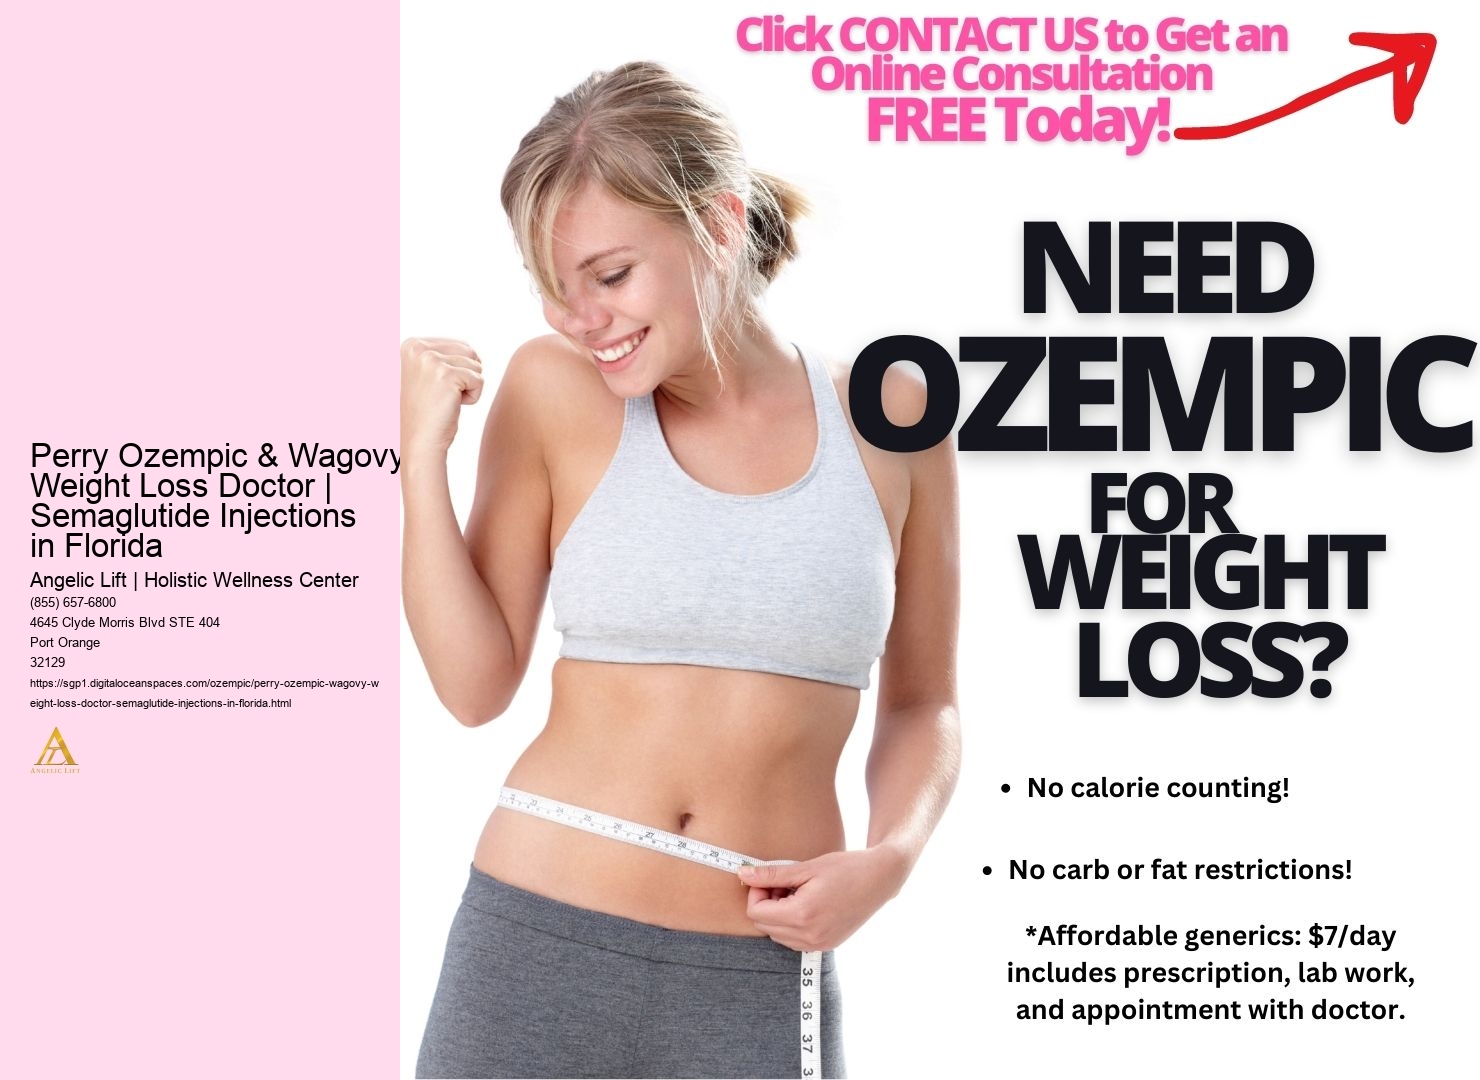 Perry Ozempic & Wagovy Weight Loss Doctor | Semaglutide Injections in Florida